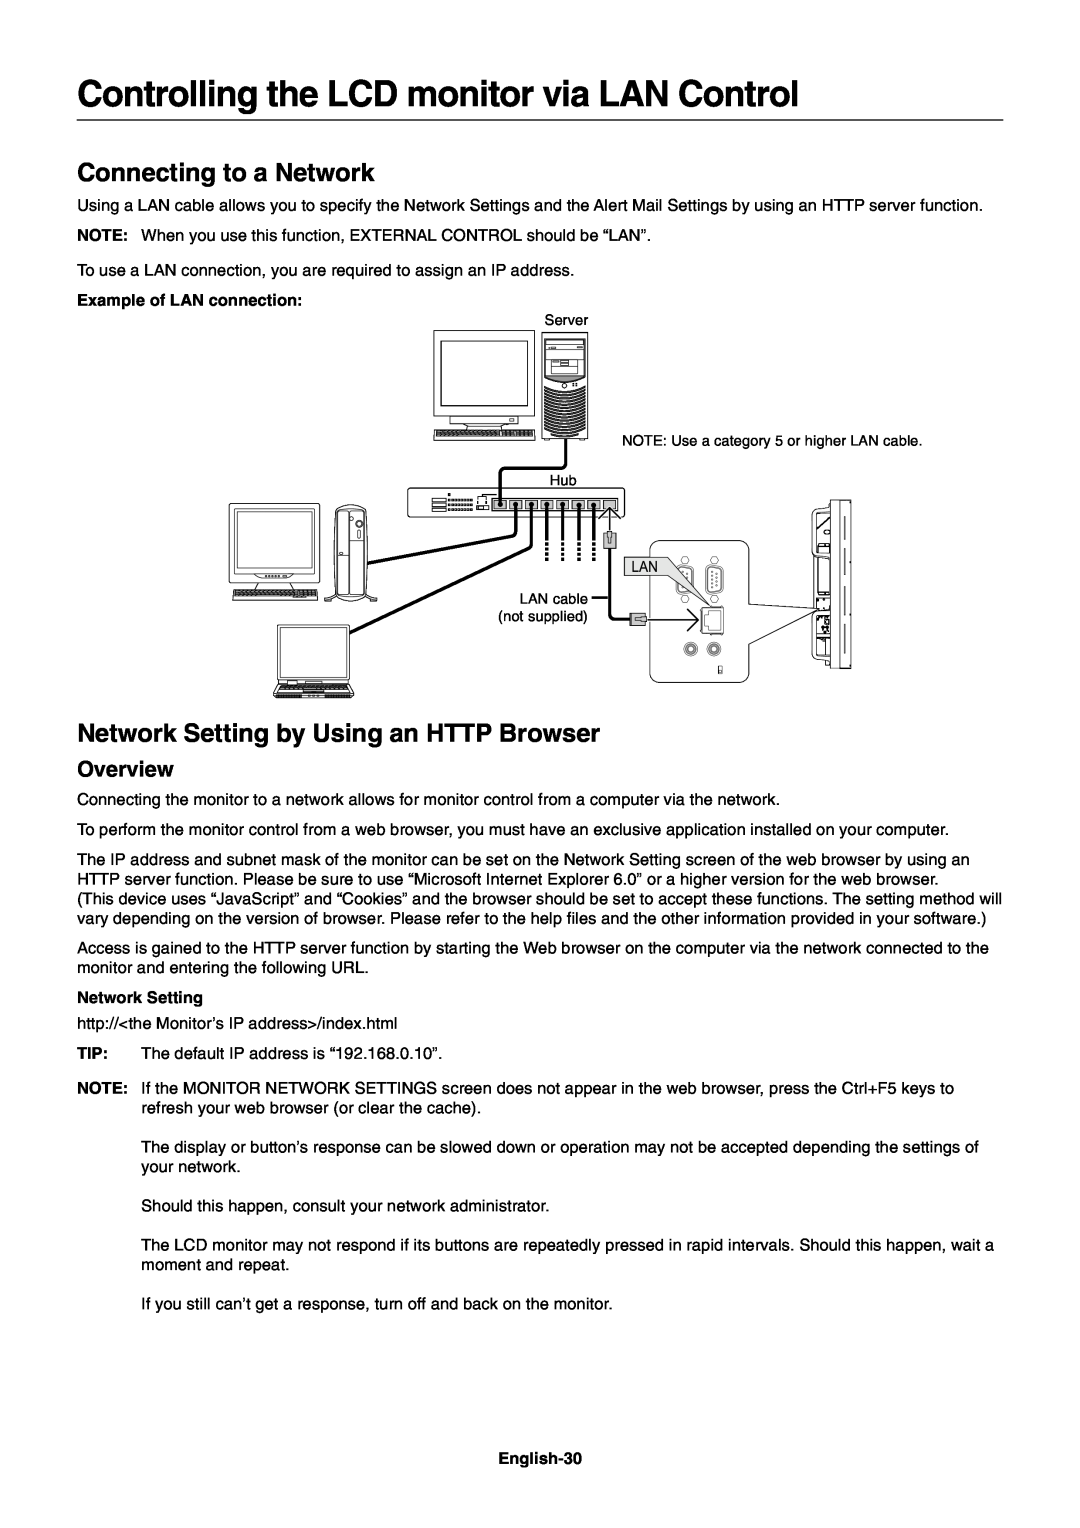 NEC X461UN Controlling the LCD monitor via LAN Control, Connecting to a Network, Network Setting by Using an HTTP Browser 